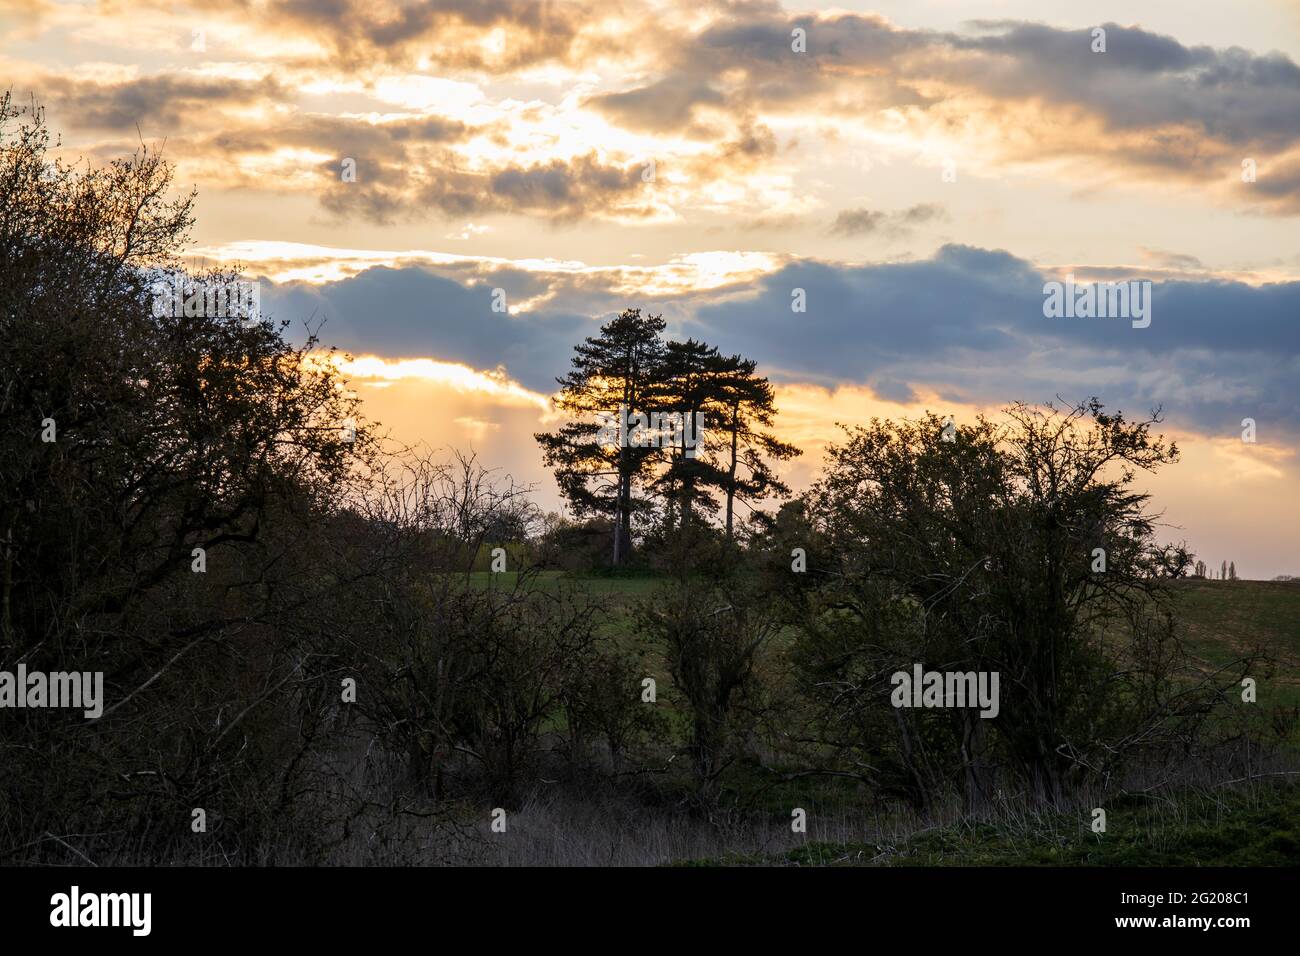 Sharnbrook, Bedfordshire, England, UK, evening - countryside scene with fields, trees and bushes in silhouette and colourful sunset sky Stock Photo